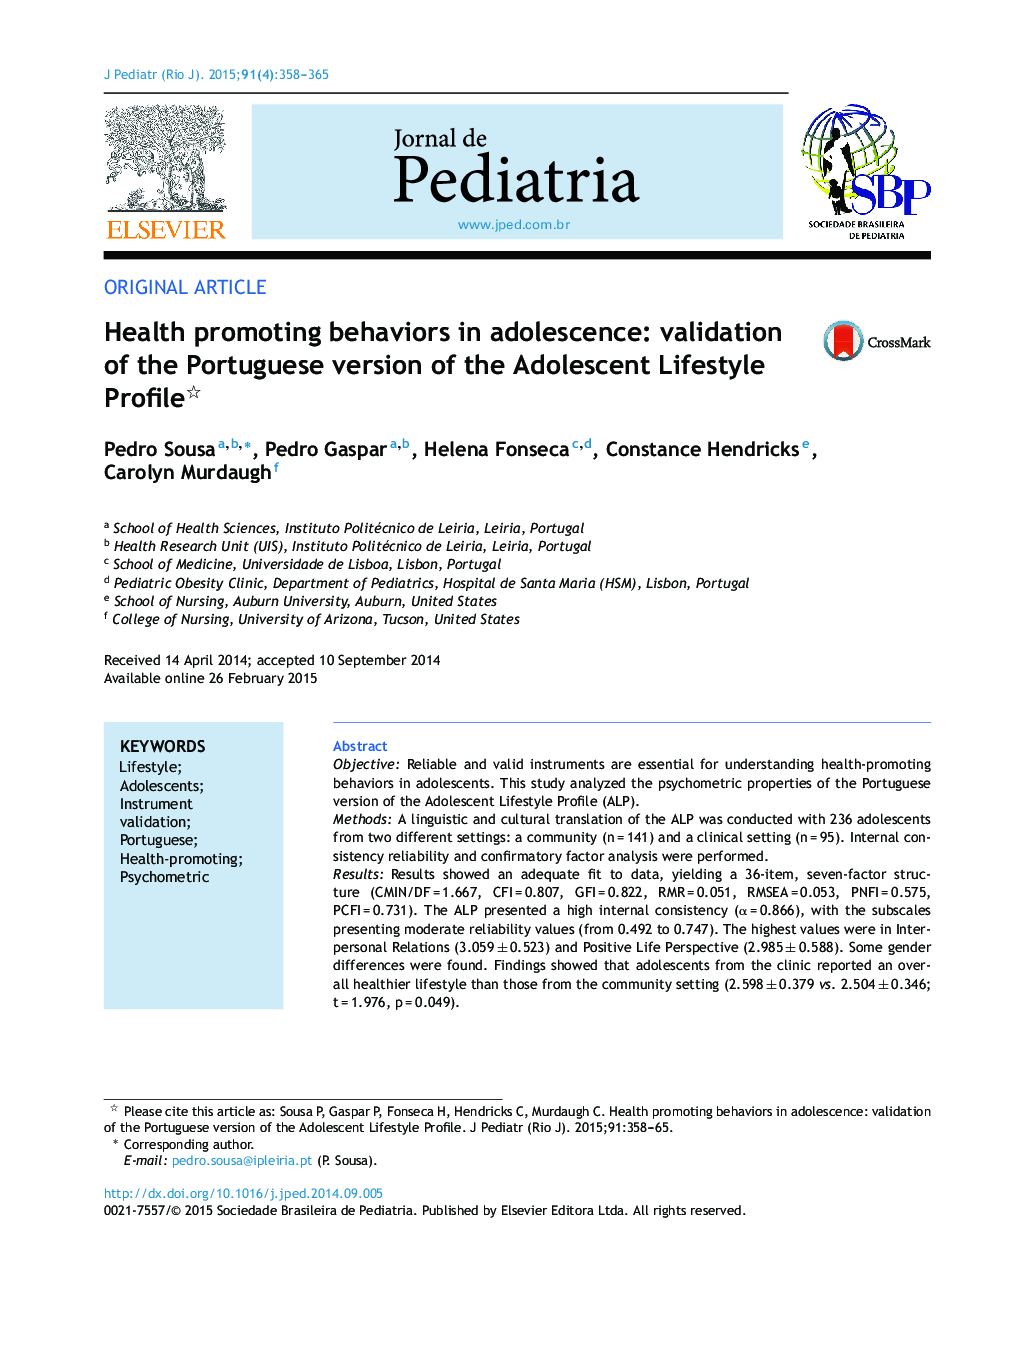 Health promoting behaviors in adolescence: validation of the Portuguese version of the Adolescent Lifestyle Profile 